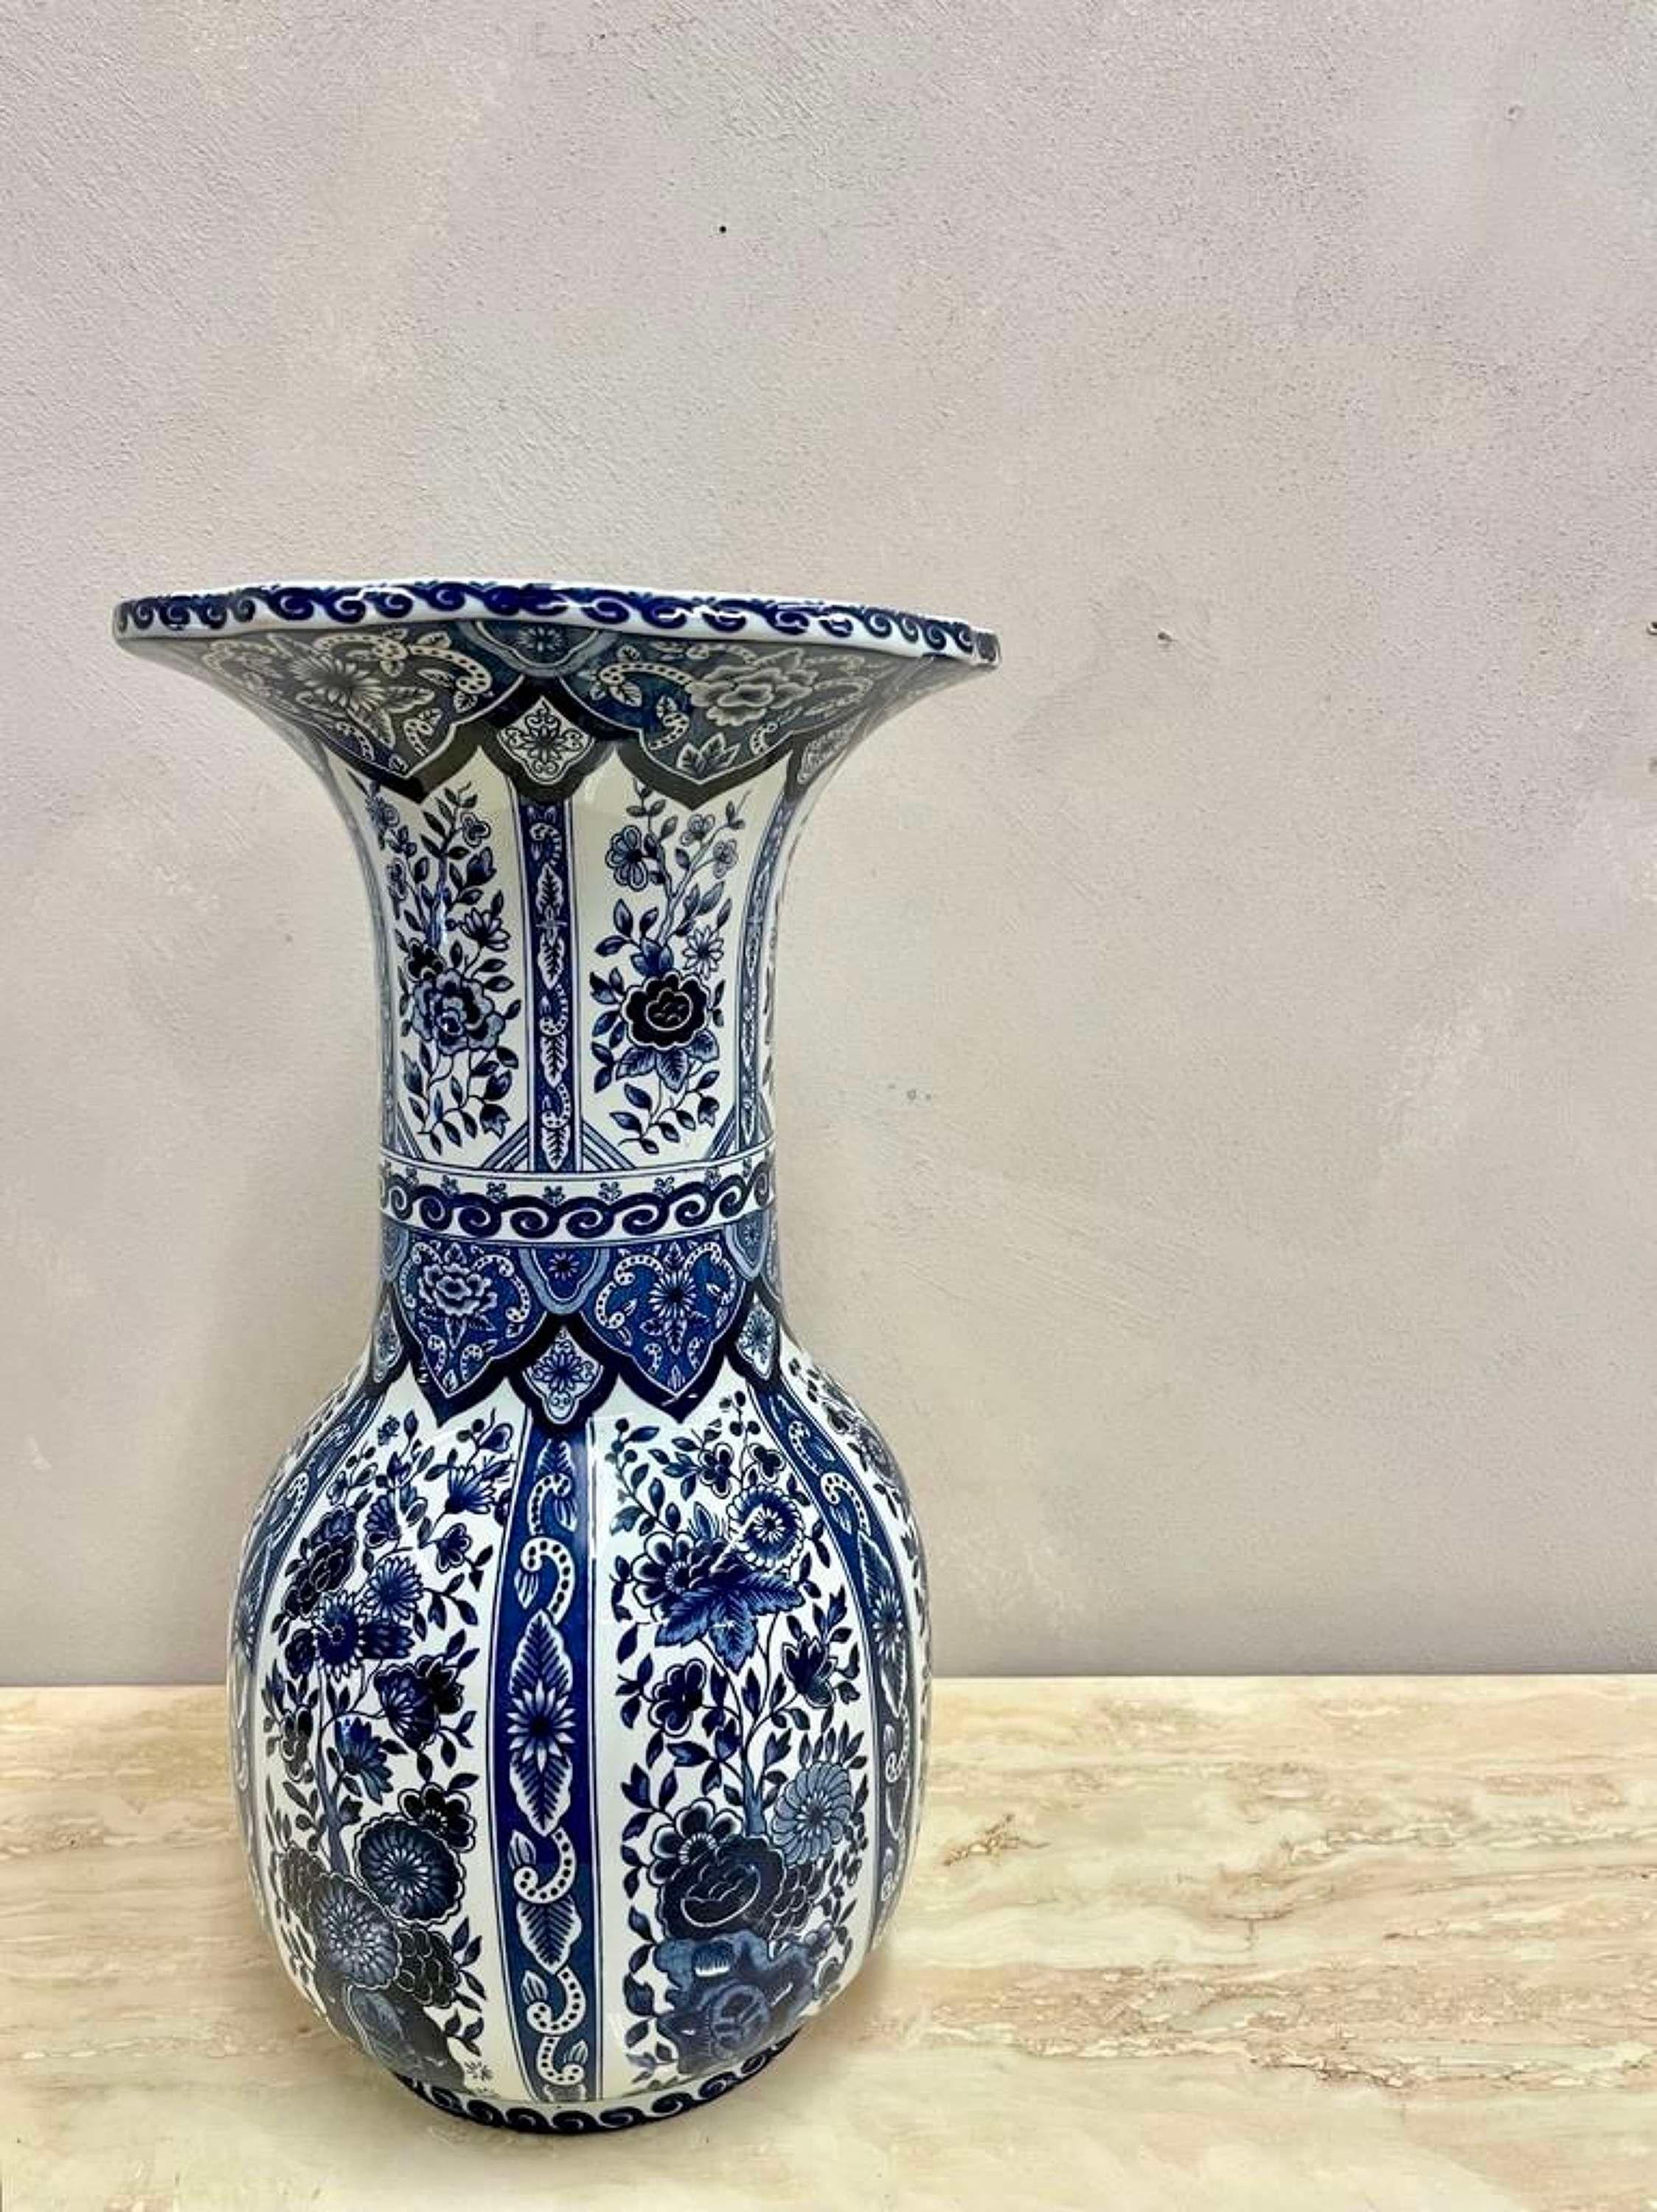 Large scale, blue and white Delft pottery vase.
Fluted shape.
Great condition.
Stamped Boch for Royal Sphinx.
Dimensions:W: 16cm (6.3